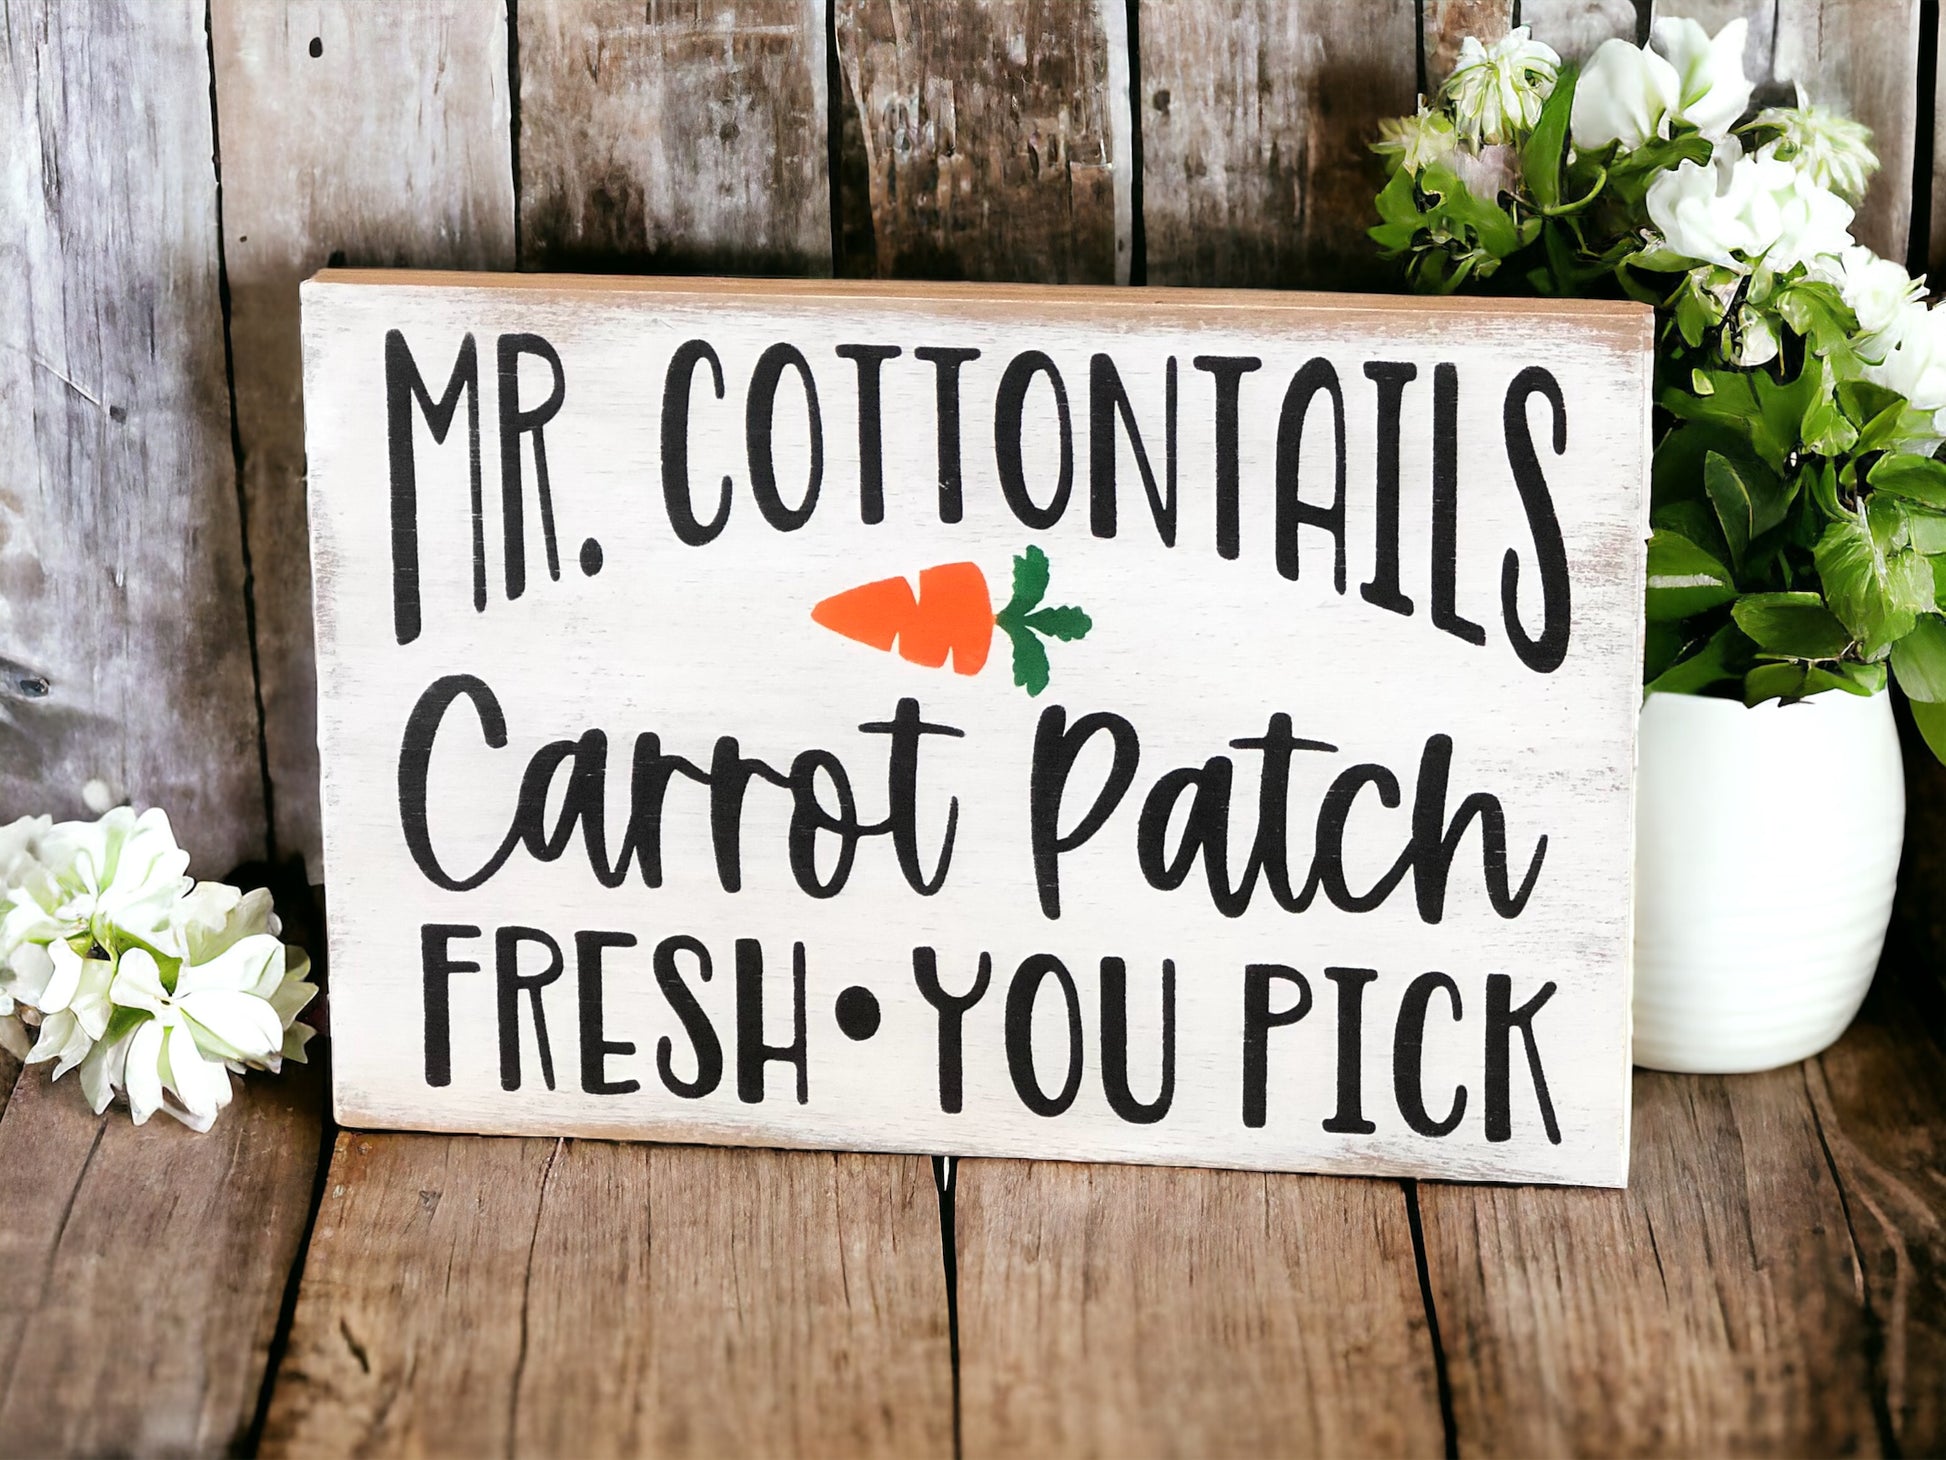 "Carrot patch" wood sign